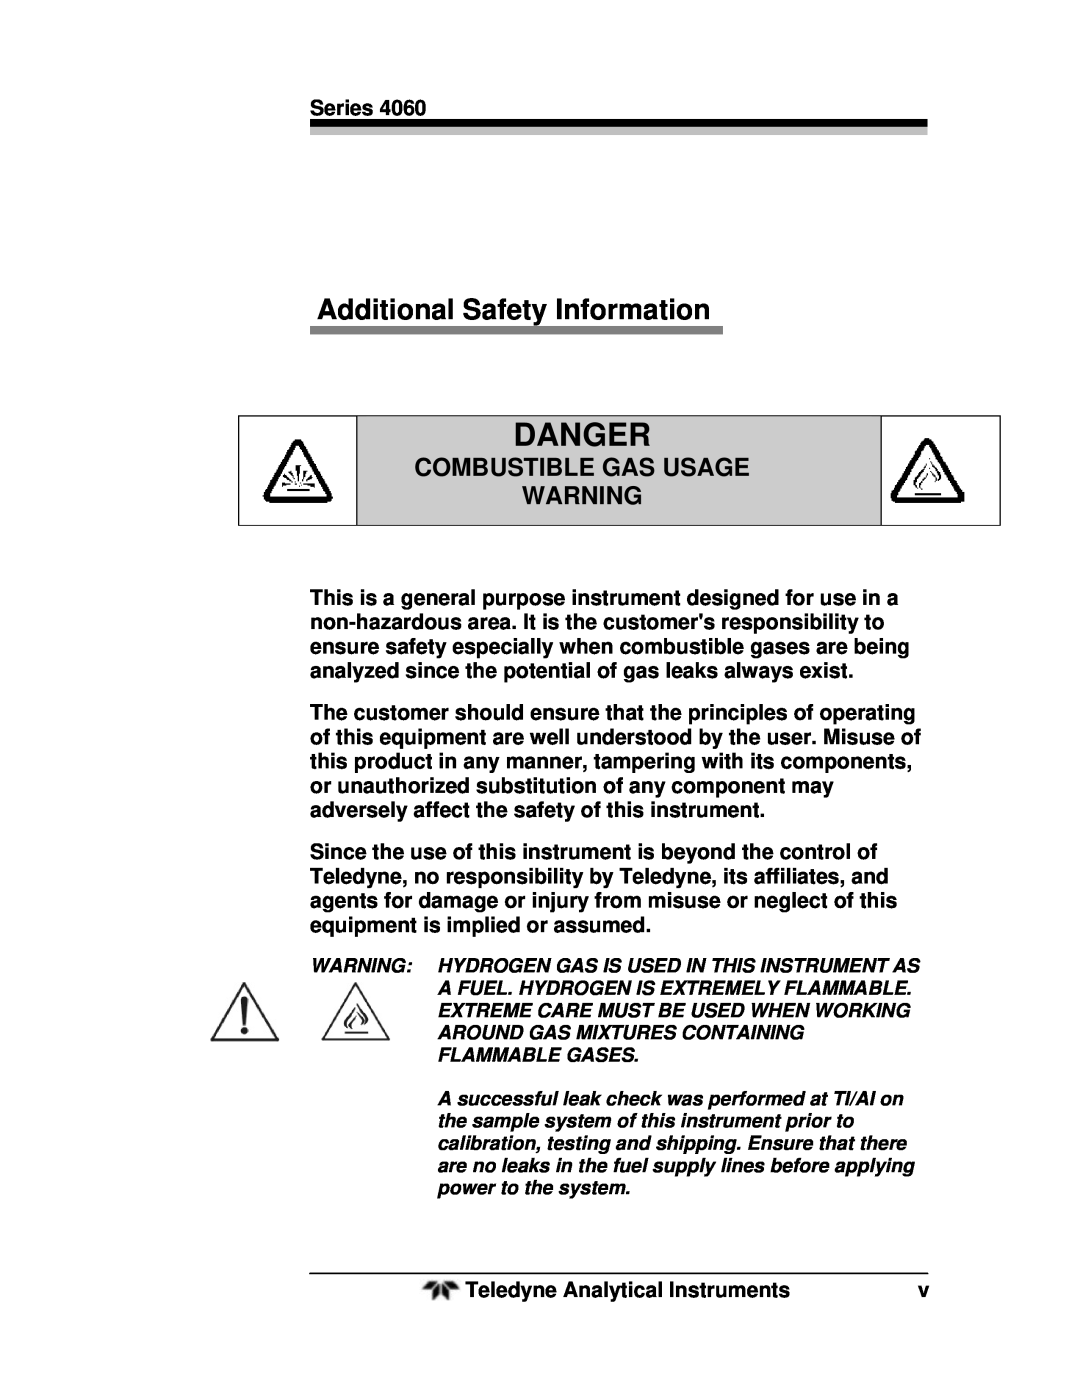 Teledyne 4060 manual Additional Safety Information, Combustible Gas Usage, Danger 